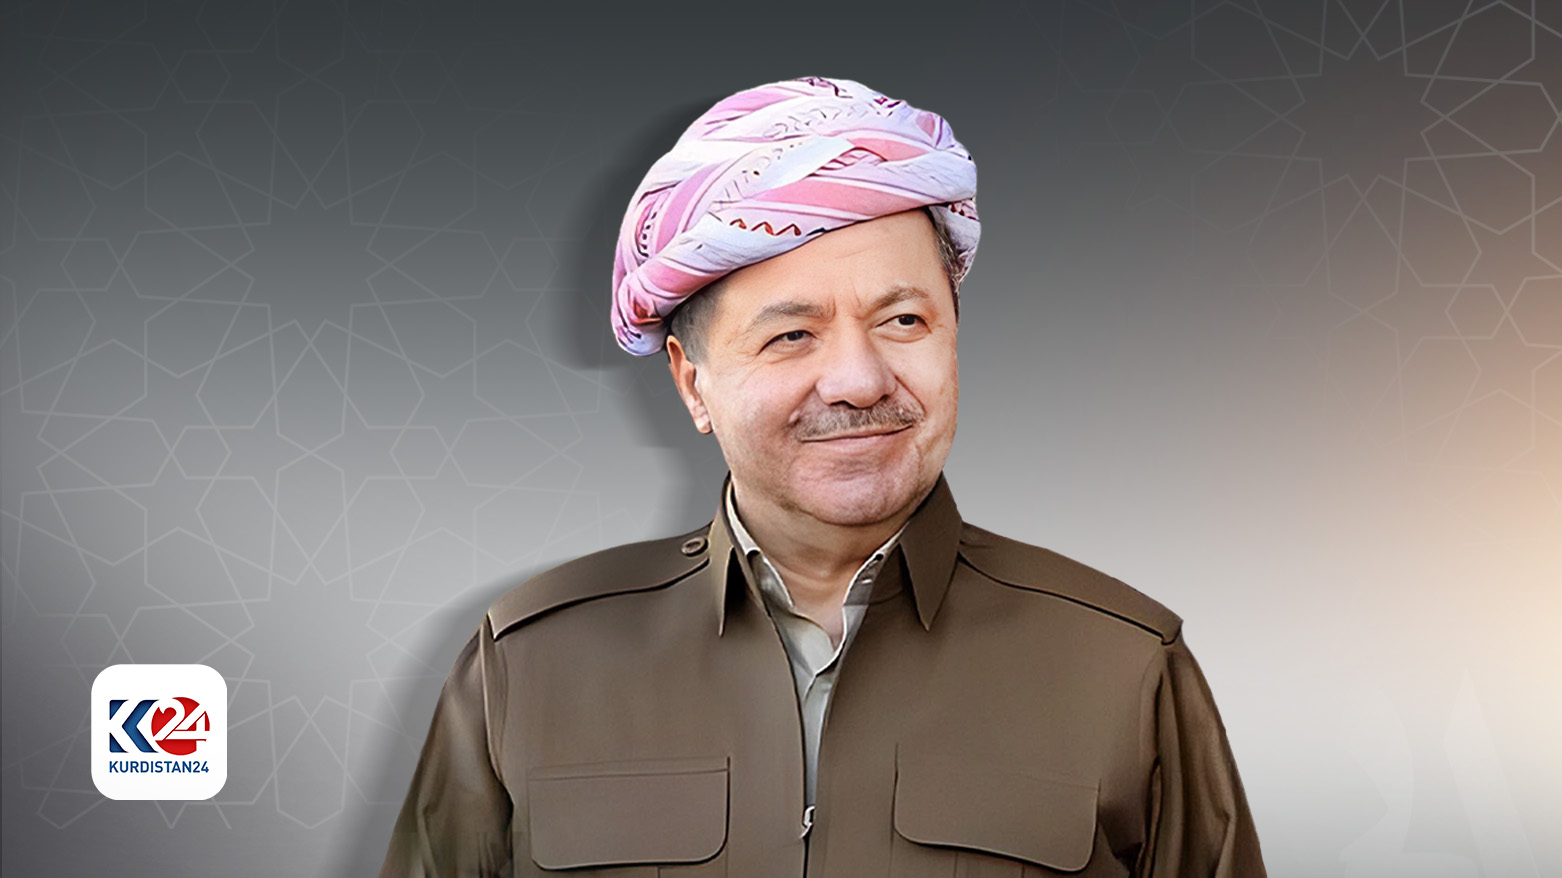 KDP President Masoud Barzani emphasizes his support for holding free and fair election